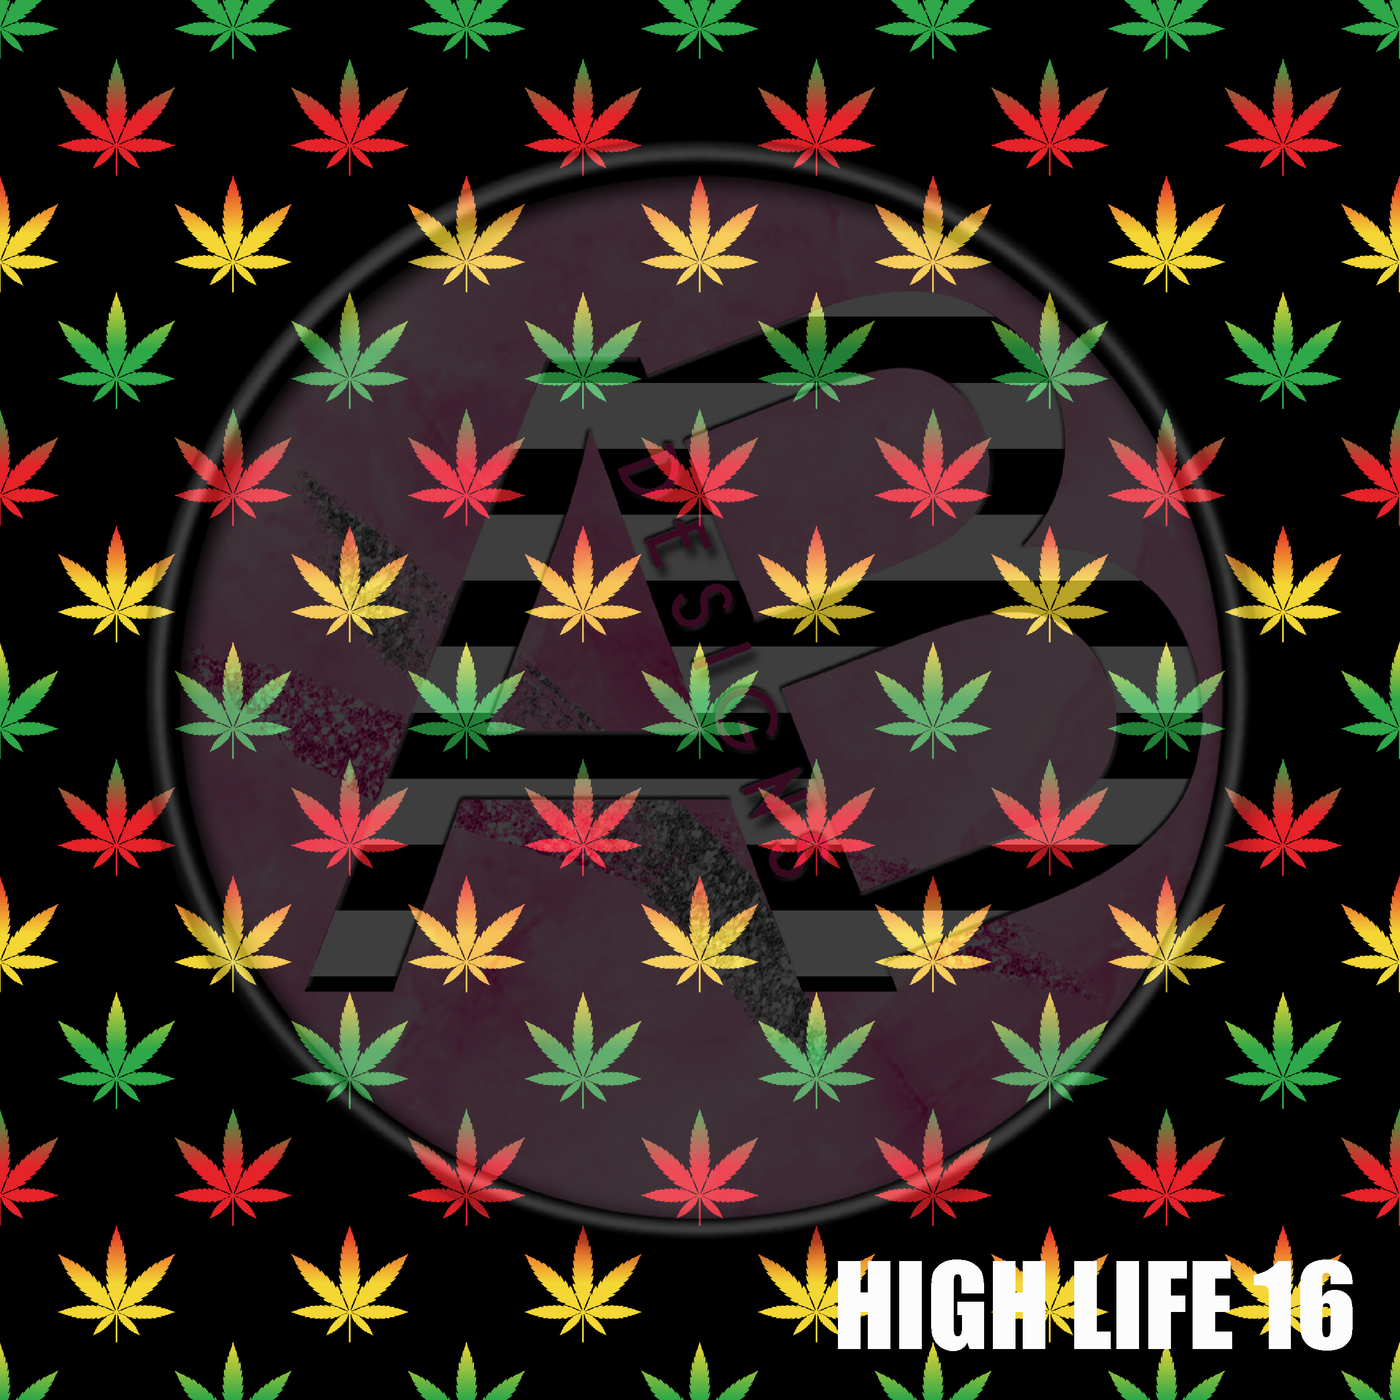 Adhesive Patterned Vinyl - High Life 16